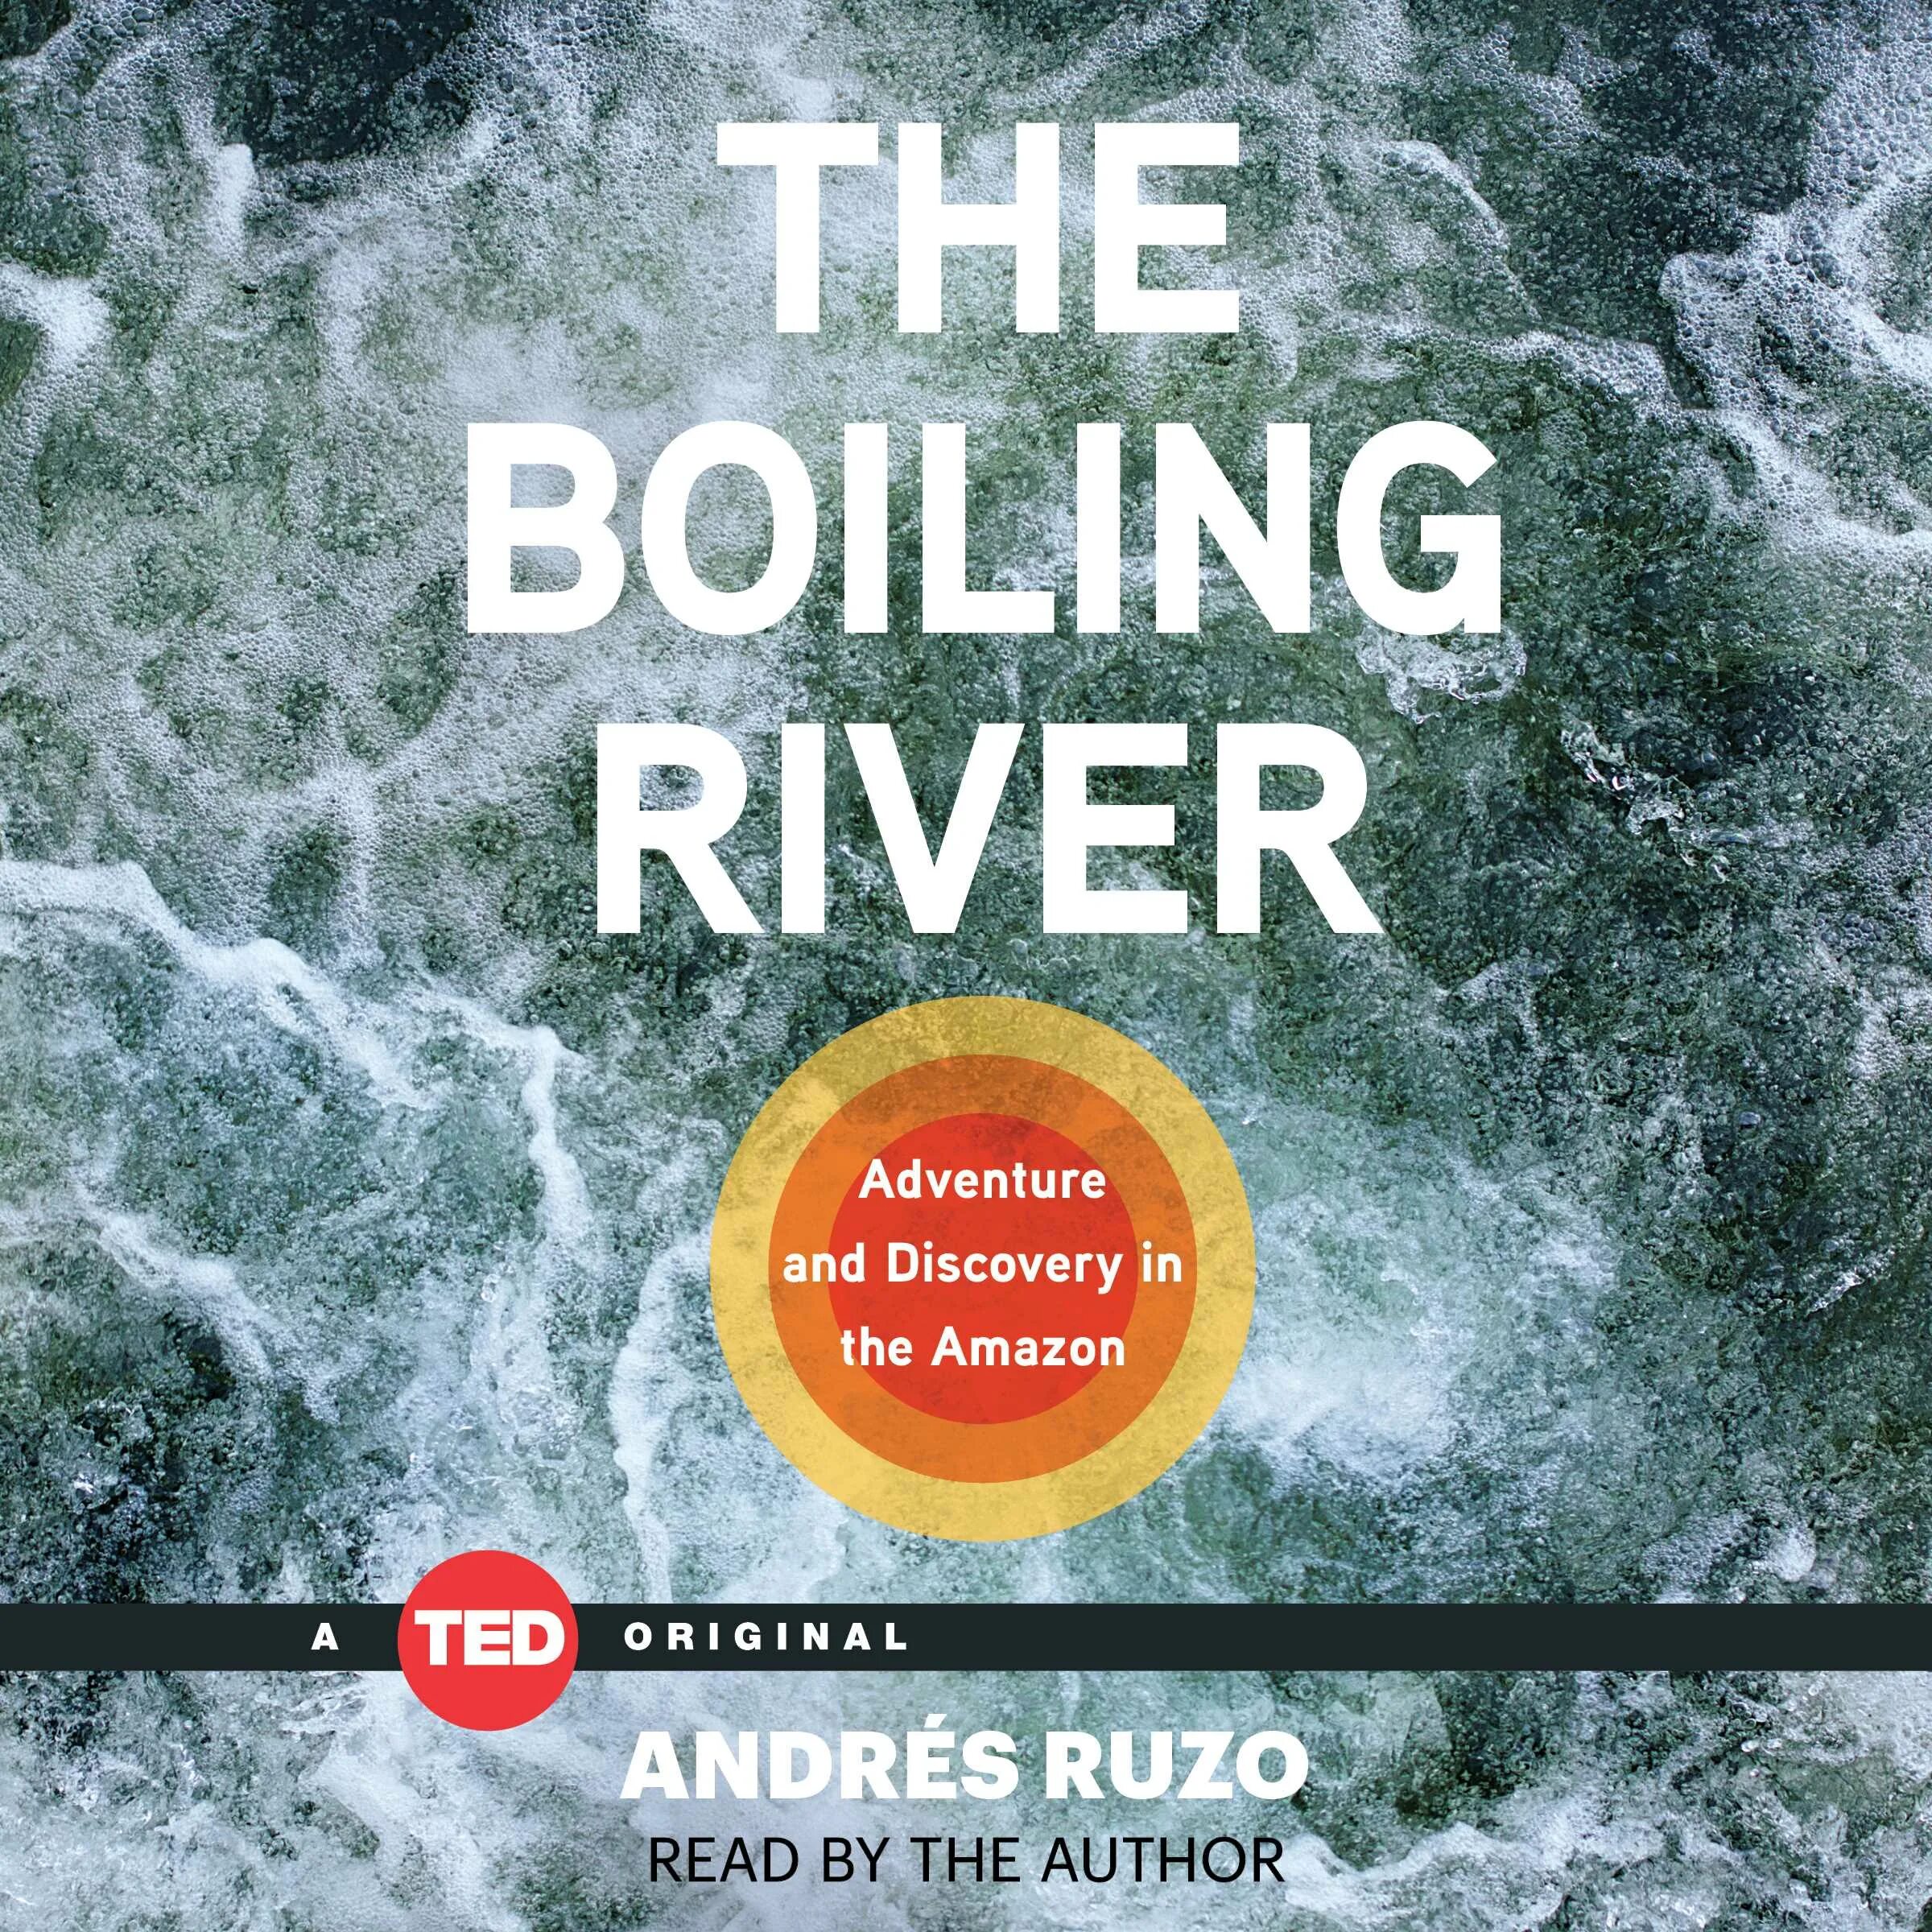 Андре аудиокнига. Andres Ted. National Geographic Explorer Andres Ruzo studies the boiling River of the Amazon, Pru. Boiling Stars.